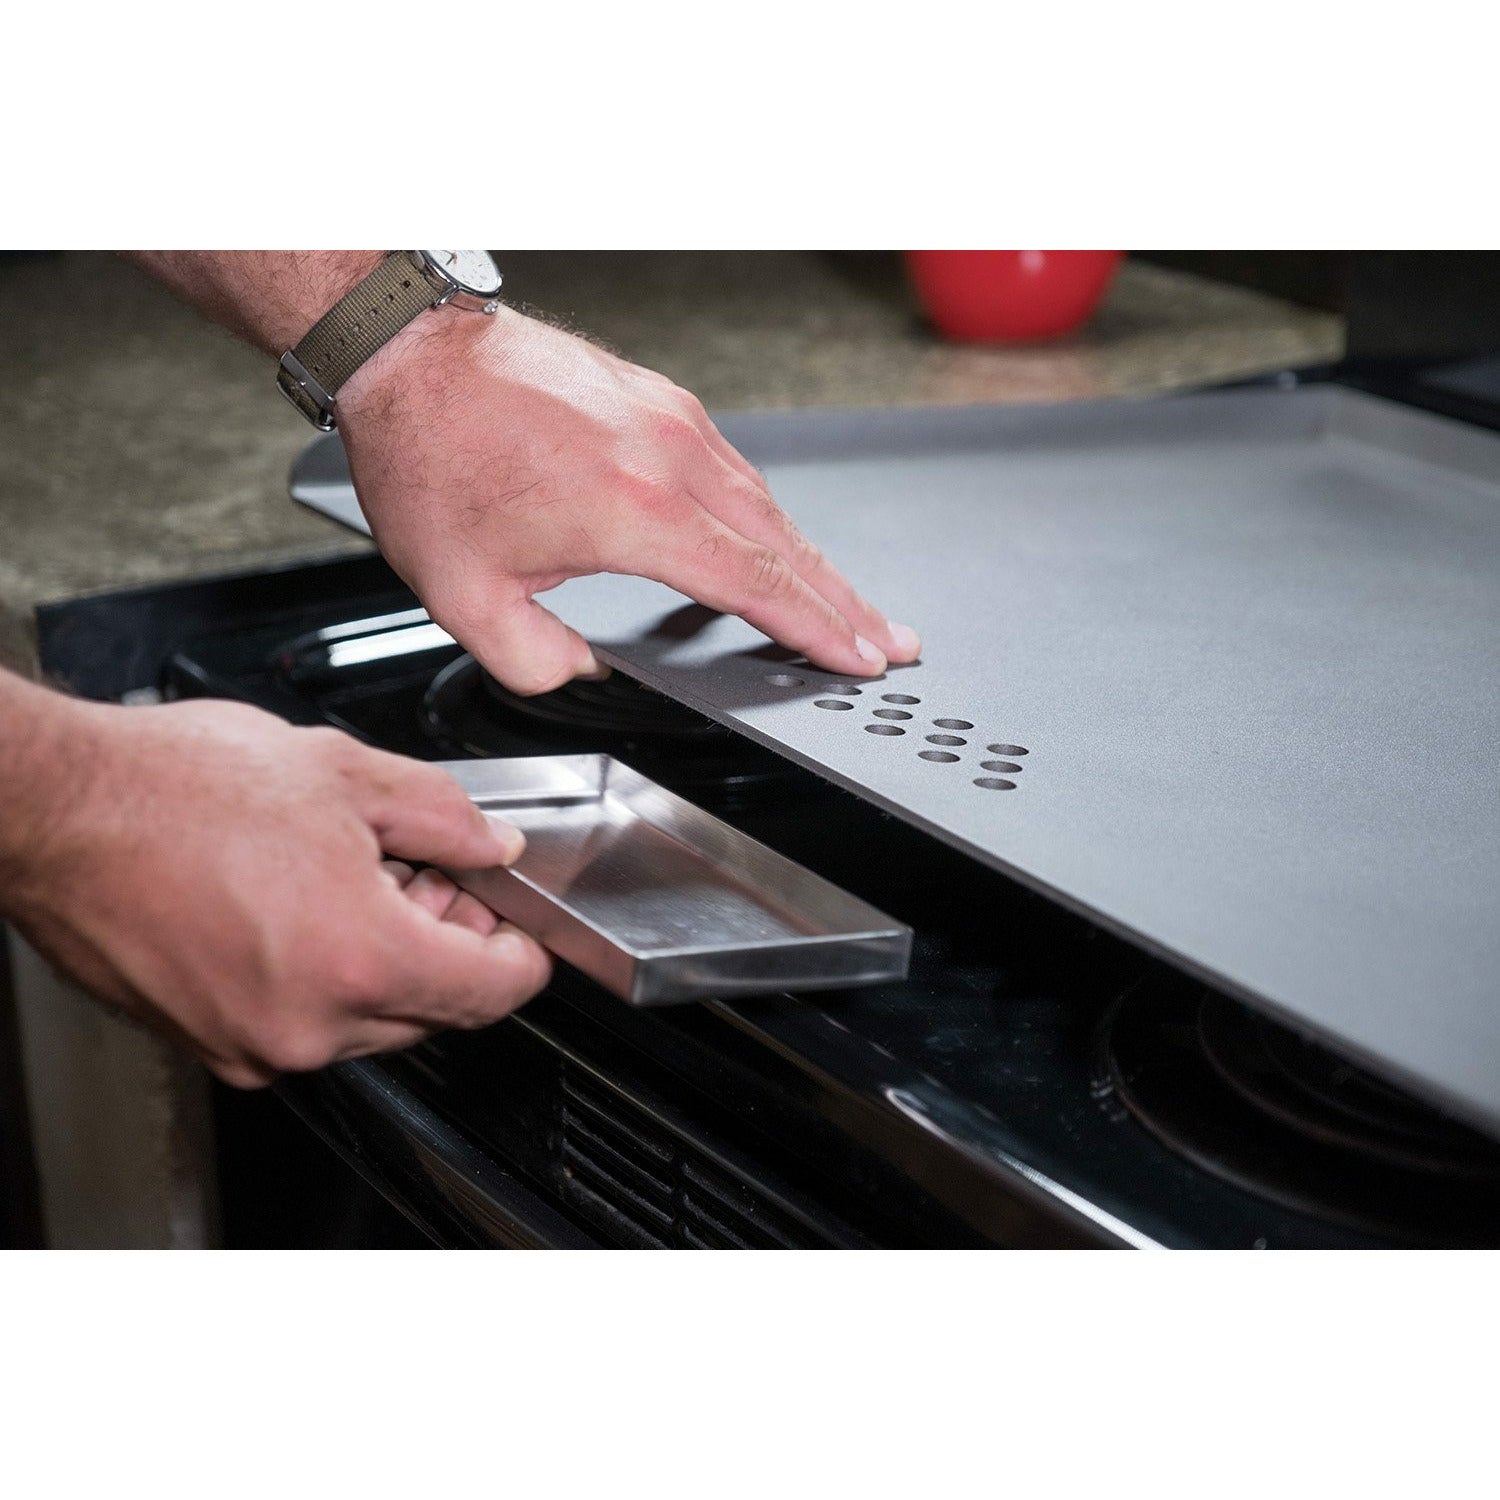 Precision Griddle Drip Tray